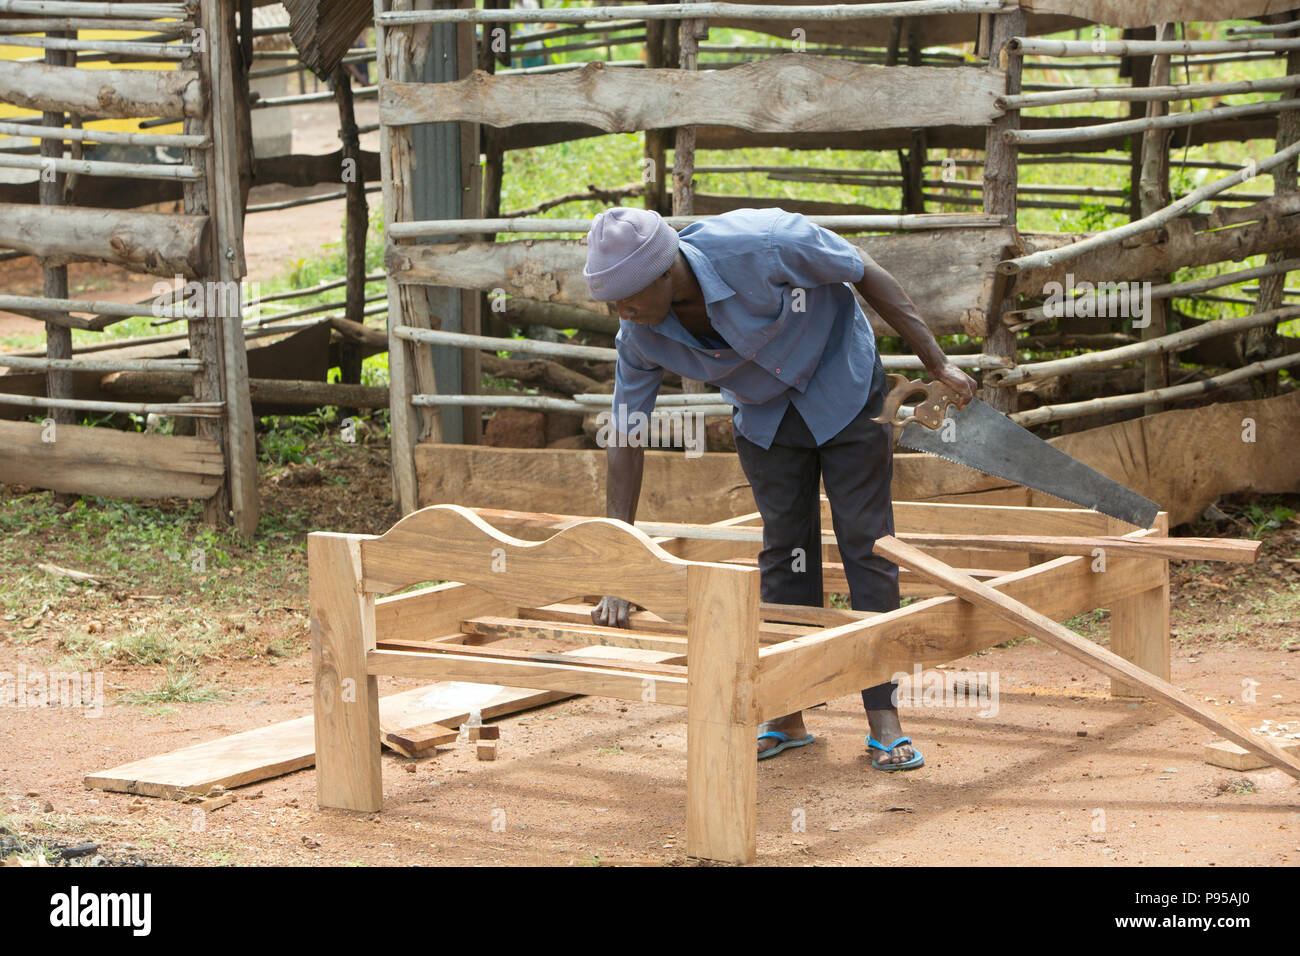 Kamdini, Uganda - A joiner carpeting a wooden bed on the roadside. Stock Photo